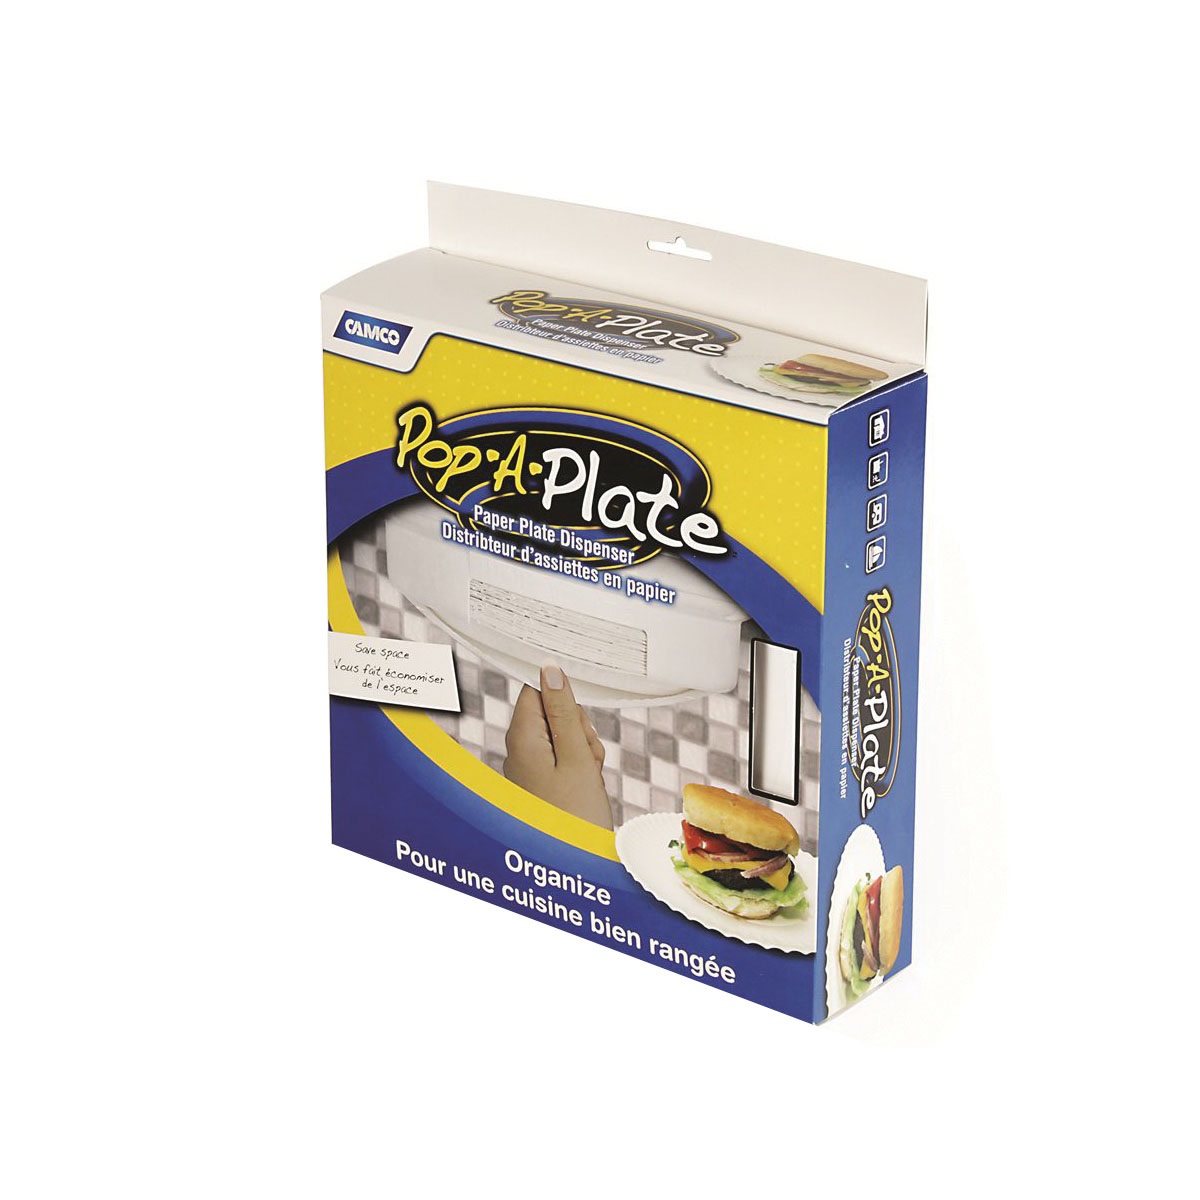 Camco Pop-A-Plate Disposable Plate Dispenser Review Video